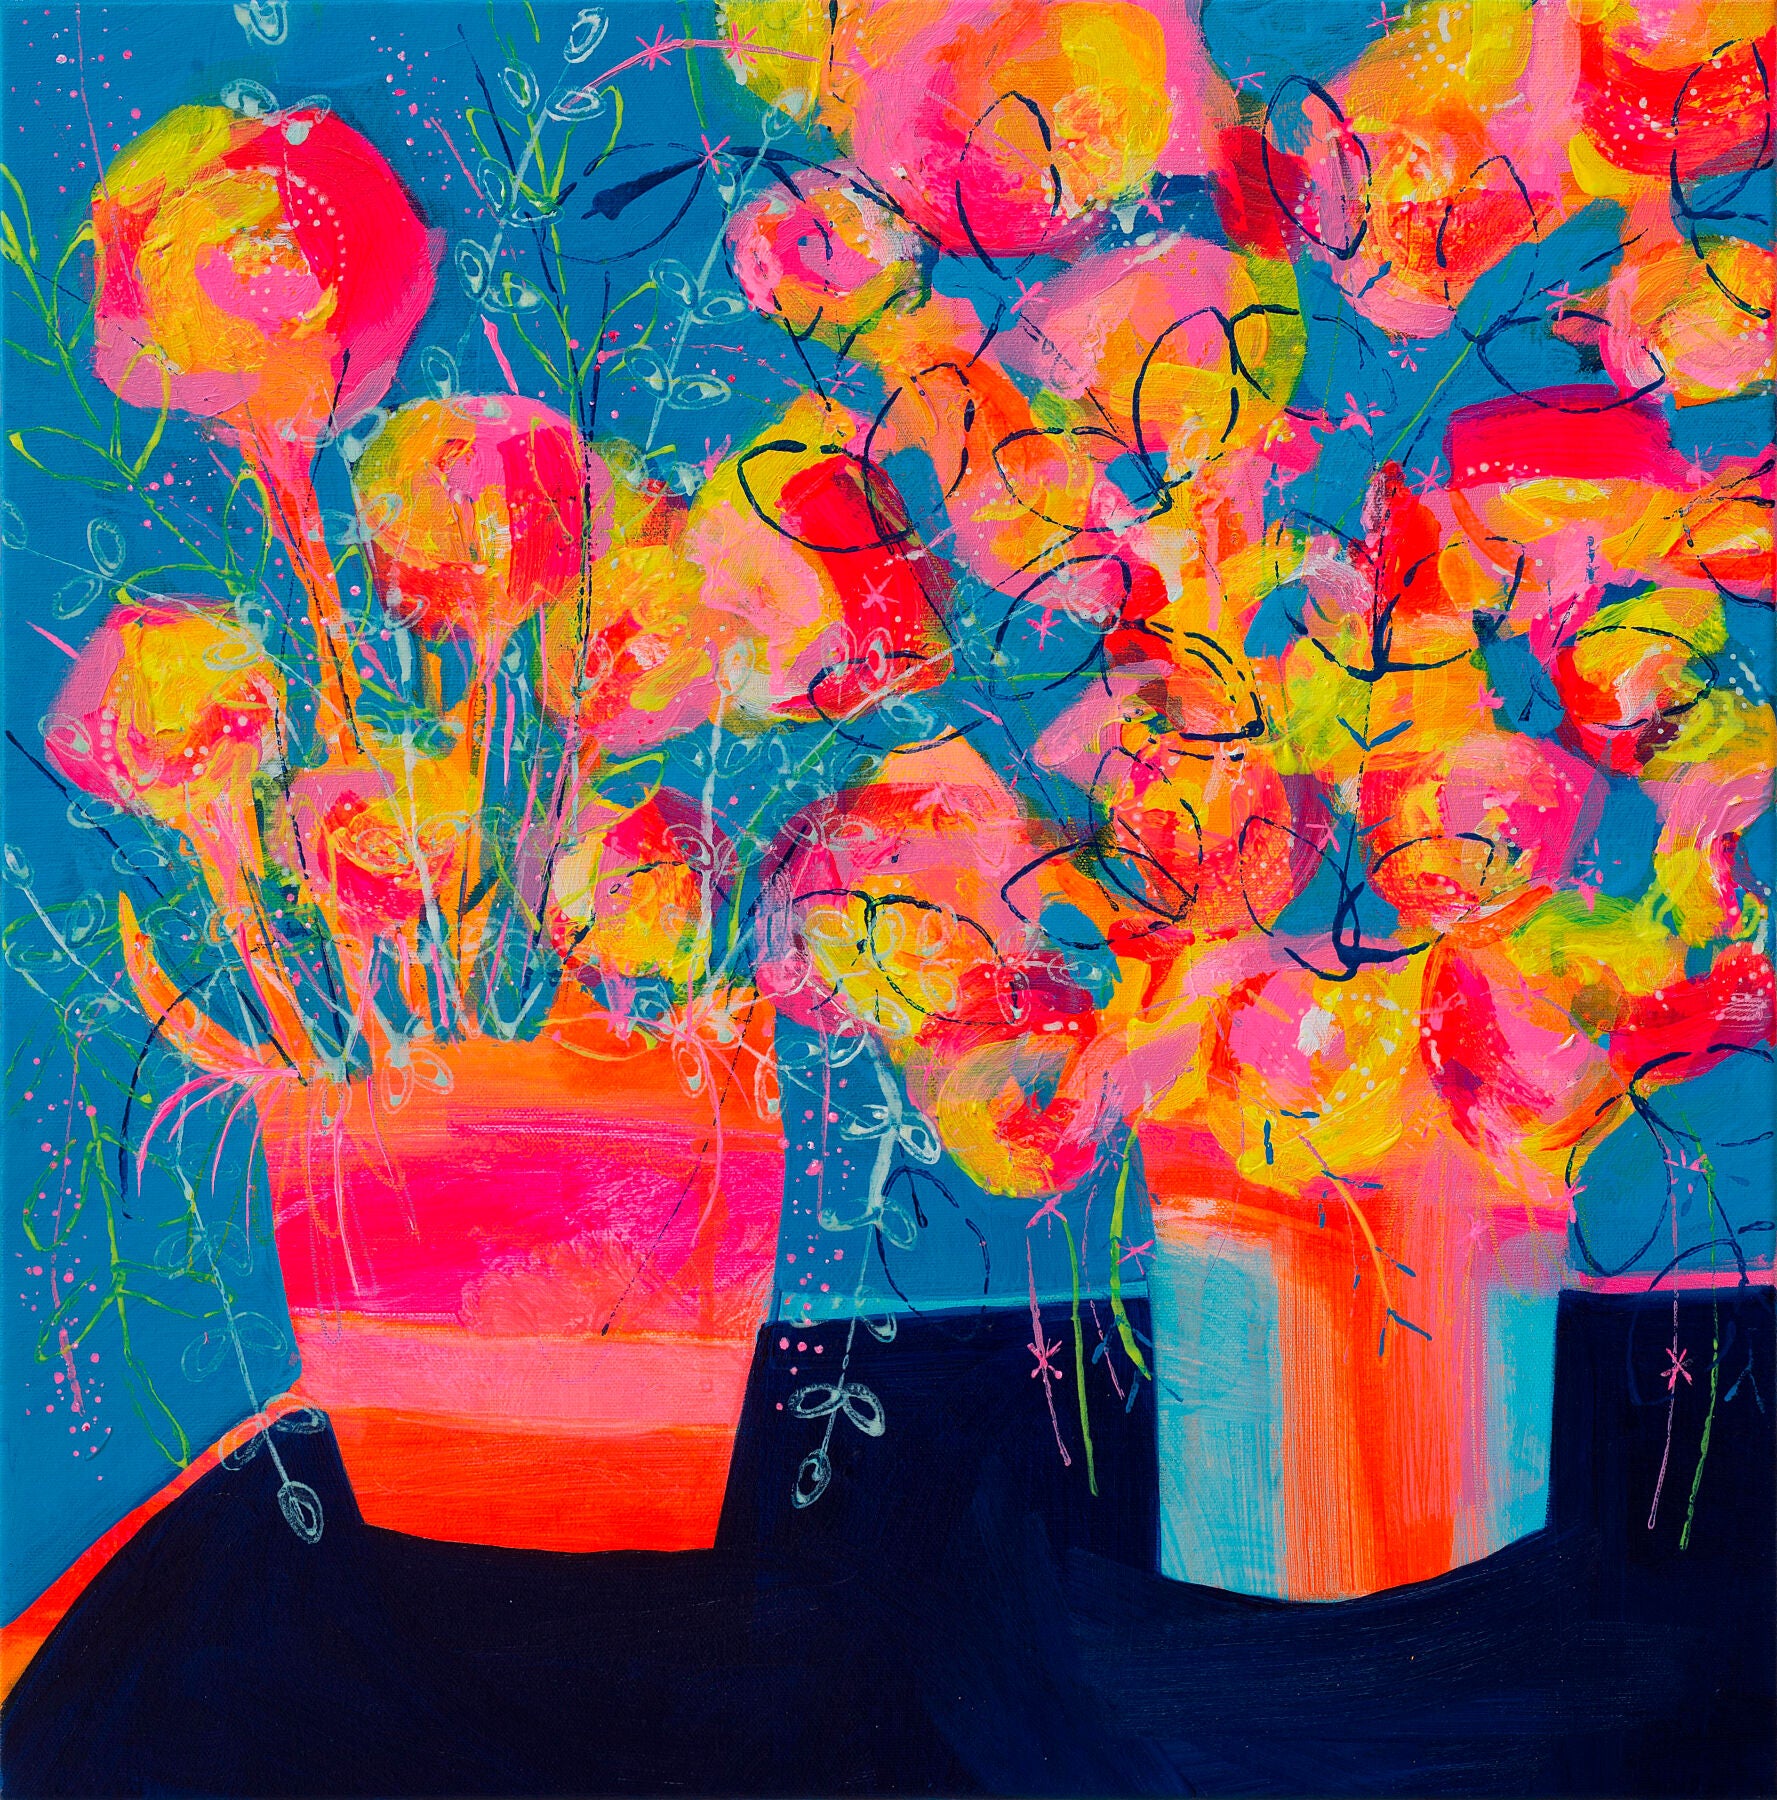 'Abundant Joy' by Faye Bridgwater: a vibrant unframed fine art print capturing the cheerful essence of spring blossoms. This contemporary mixed media artwork bursts with colourful flowers, evoking feelings of happiness and joy.